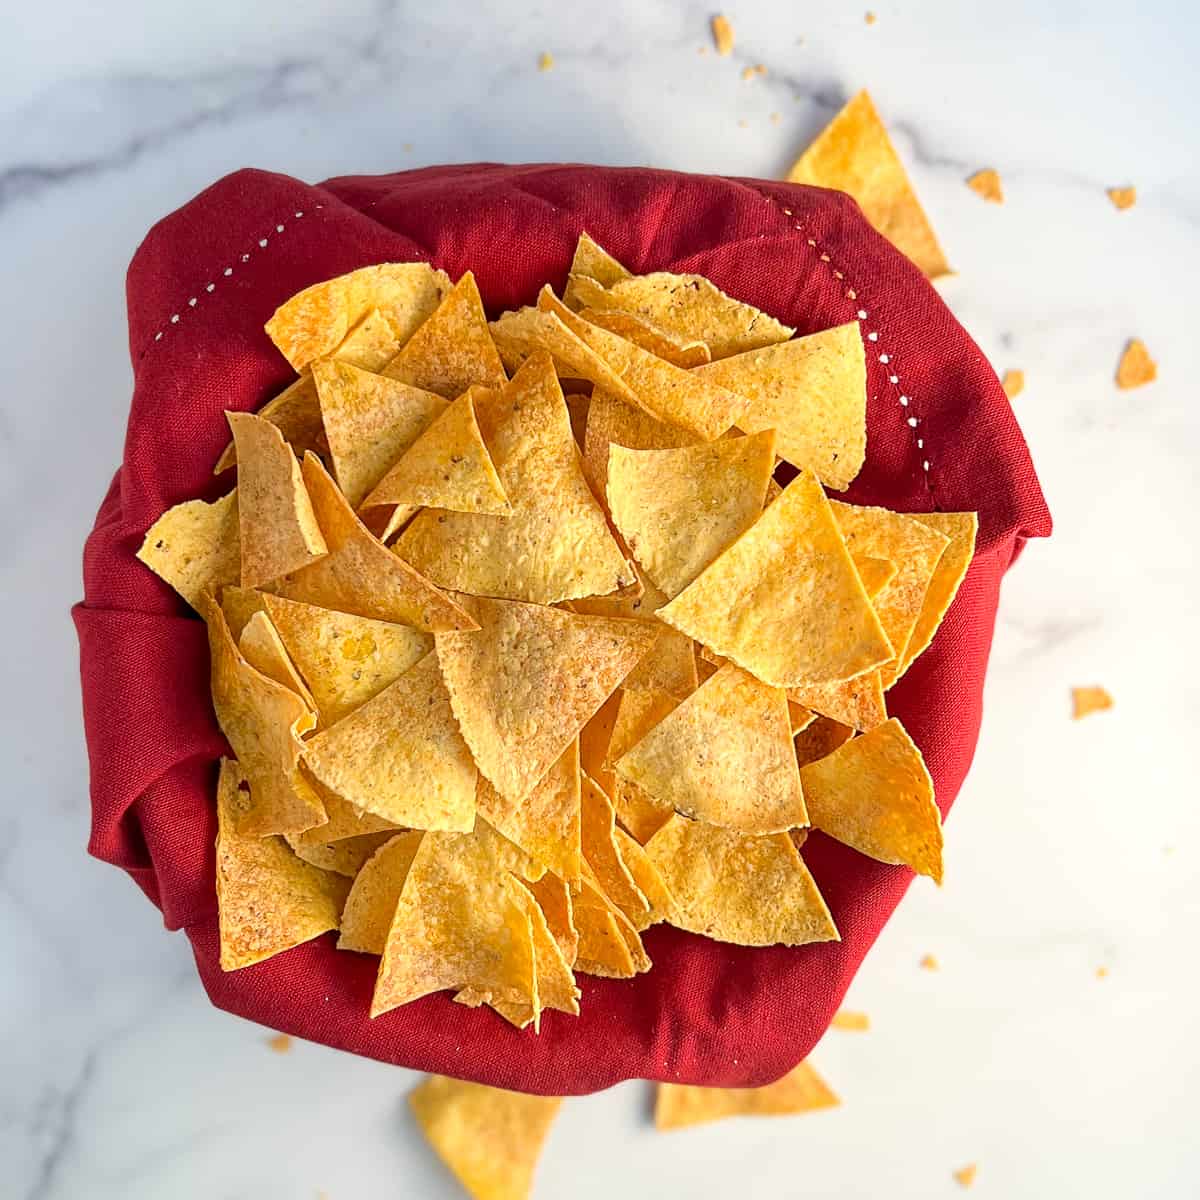 top view of oven baked tortilla chips in a bowl lined with a red napkin on a marble surface